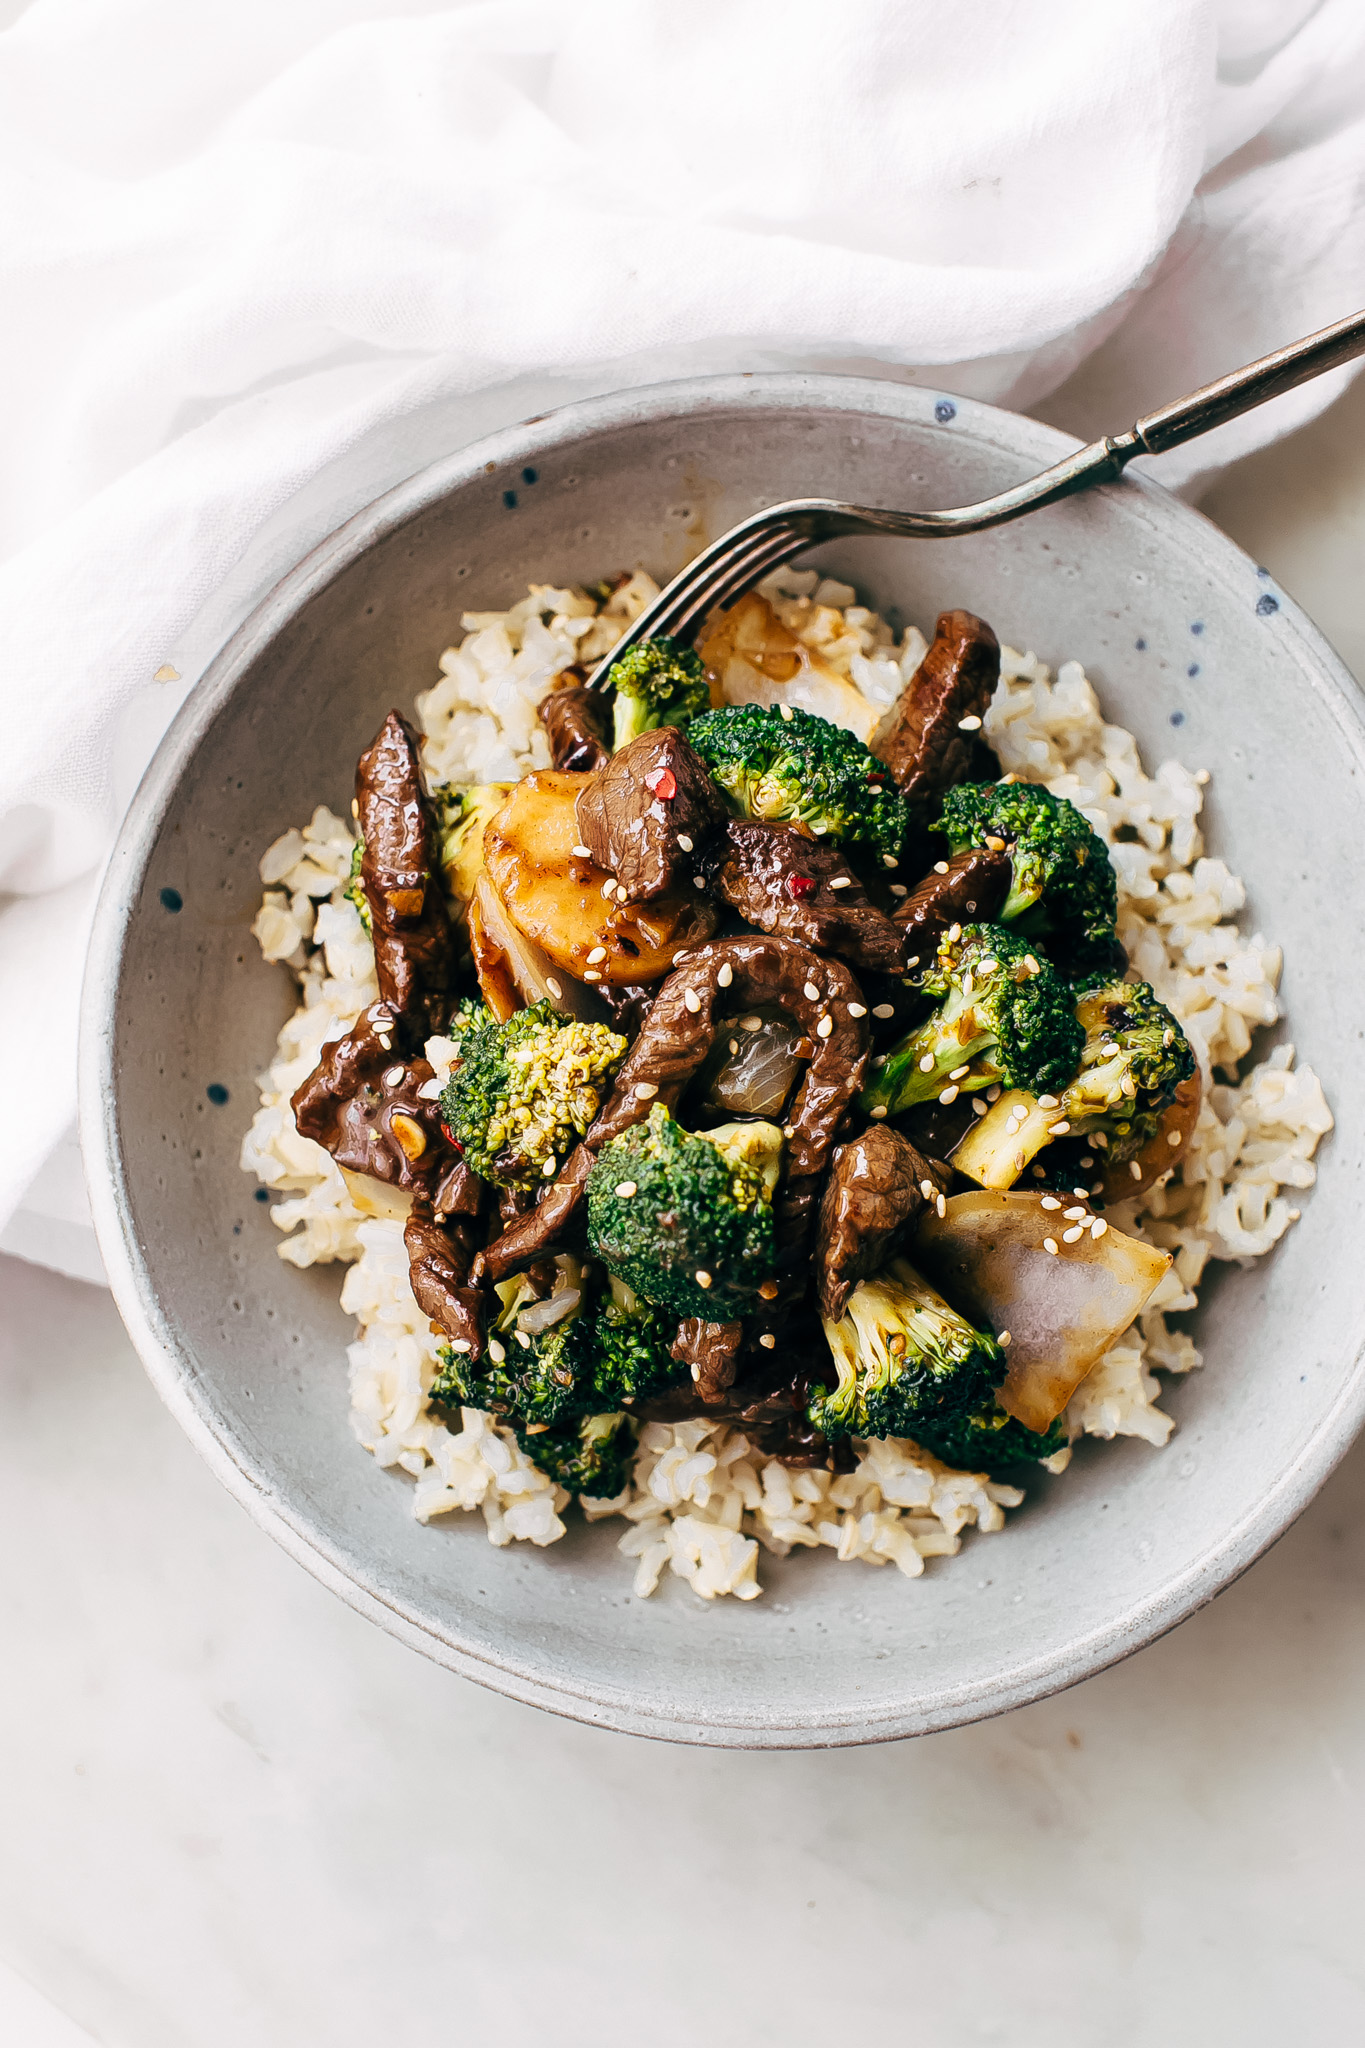 The Perfect Pair: What Fruit Complements Broccoli Beef Stir Fry ...